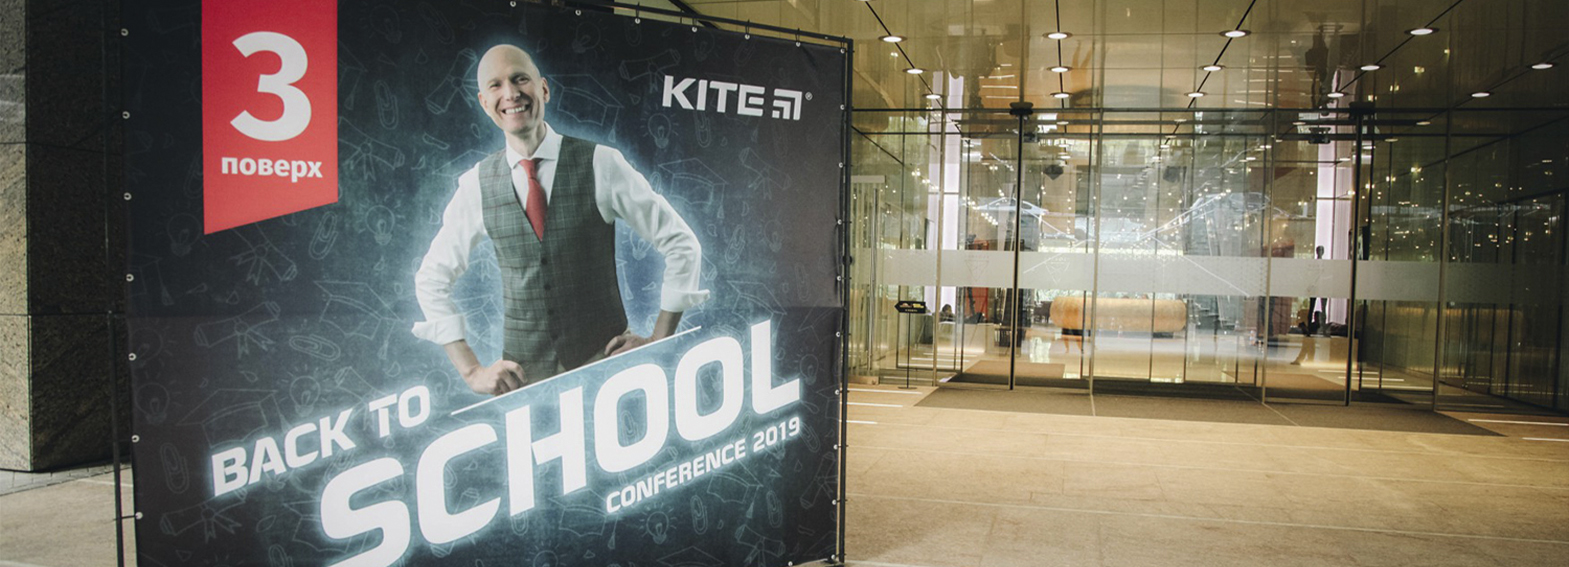 Golden Kite 2019 Conference – a landmark in the stationery world